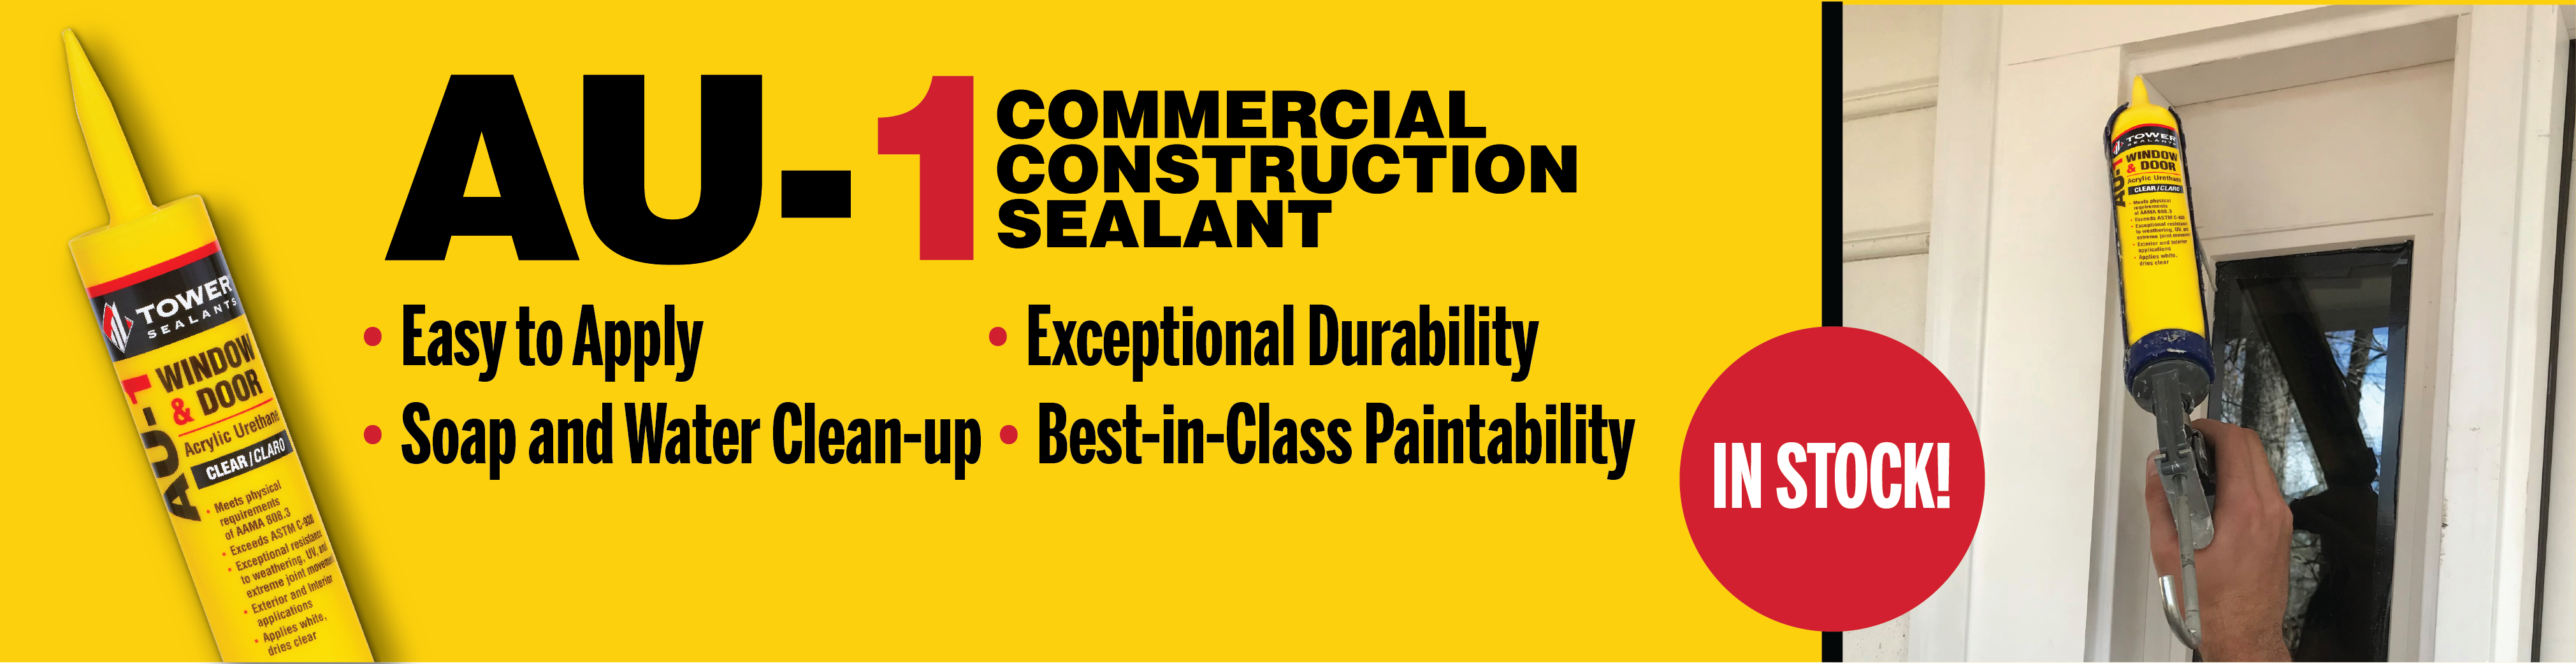 Slider: AU-1 Commercial Construction Sealant - Easy to Apply - Soap and Water Clean-up - Exceptional Durability - Best-in-Class Paintability